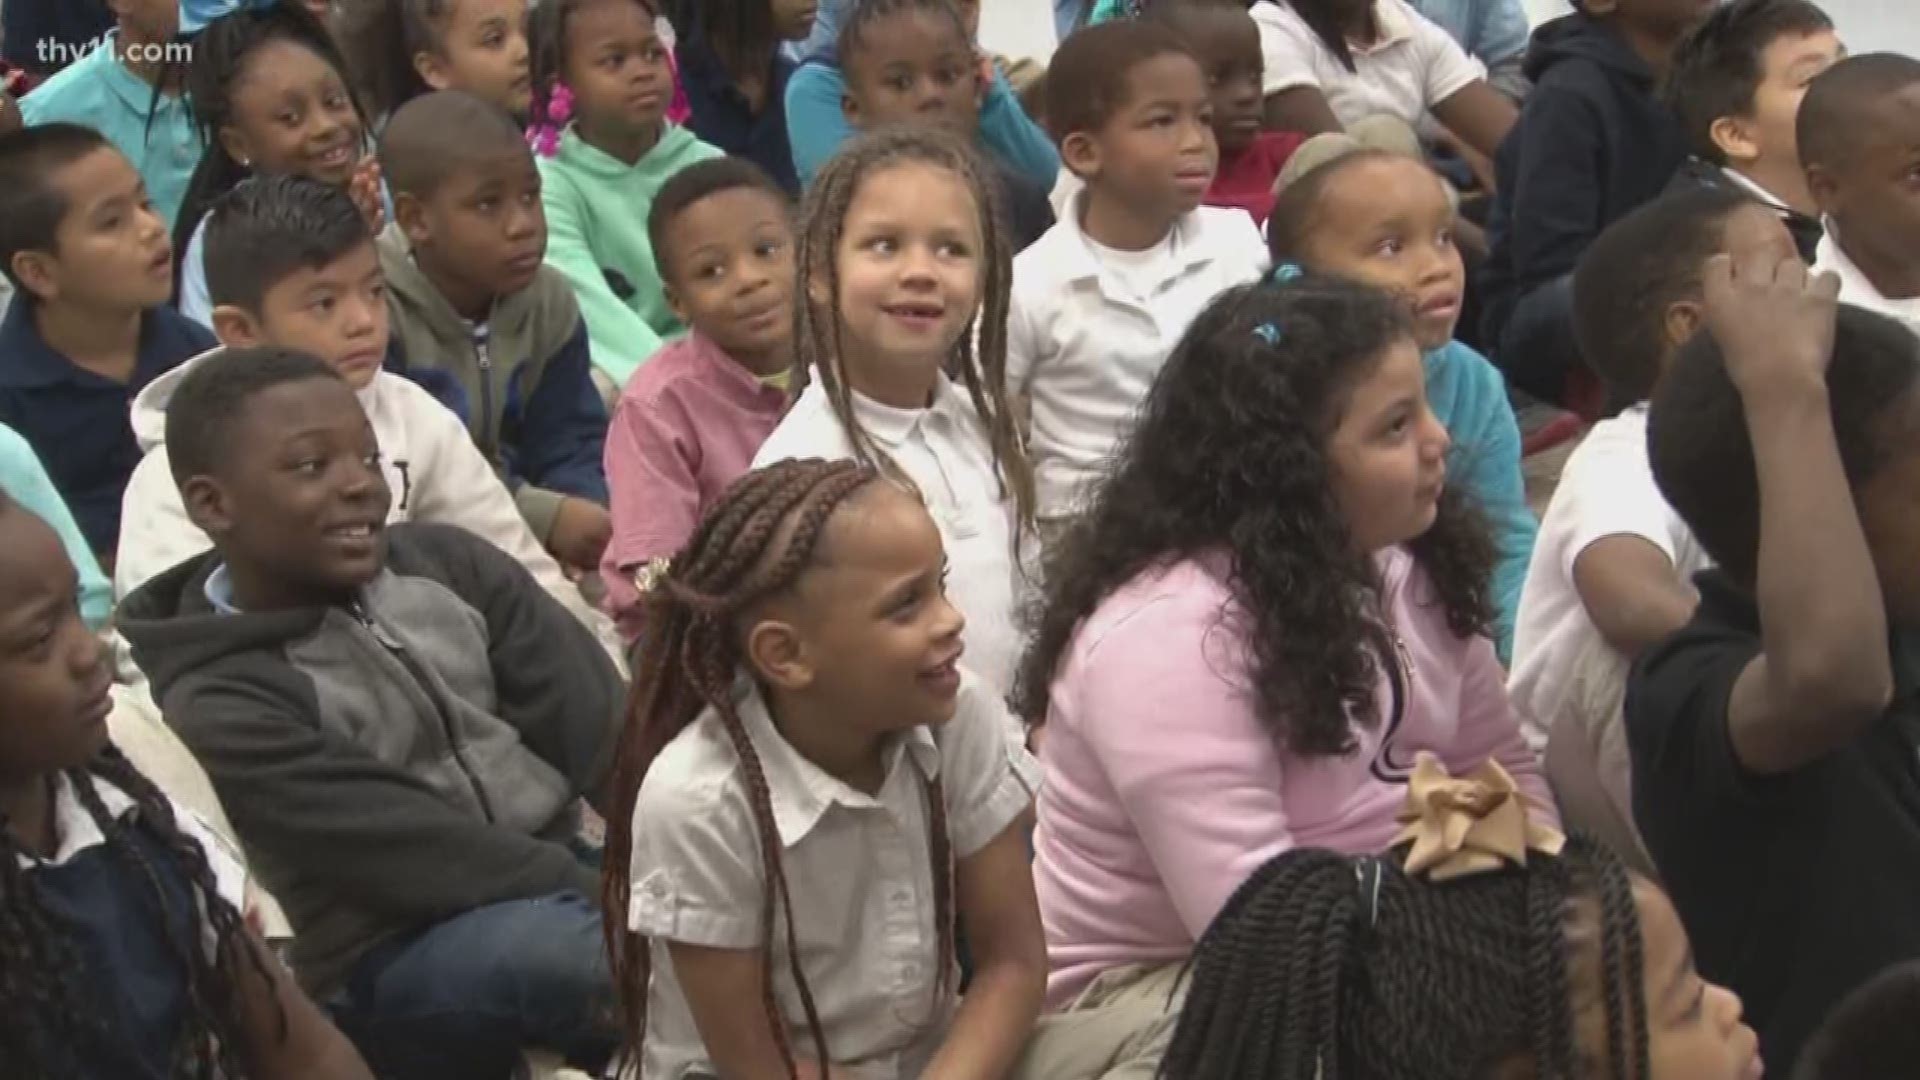 This was the biggest single day of reading in the Little Rock School District. All 600 classes in Little Rock's elementary schools had guest readers.